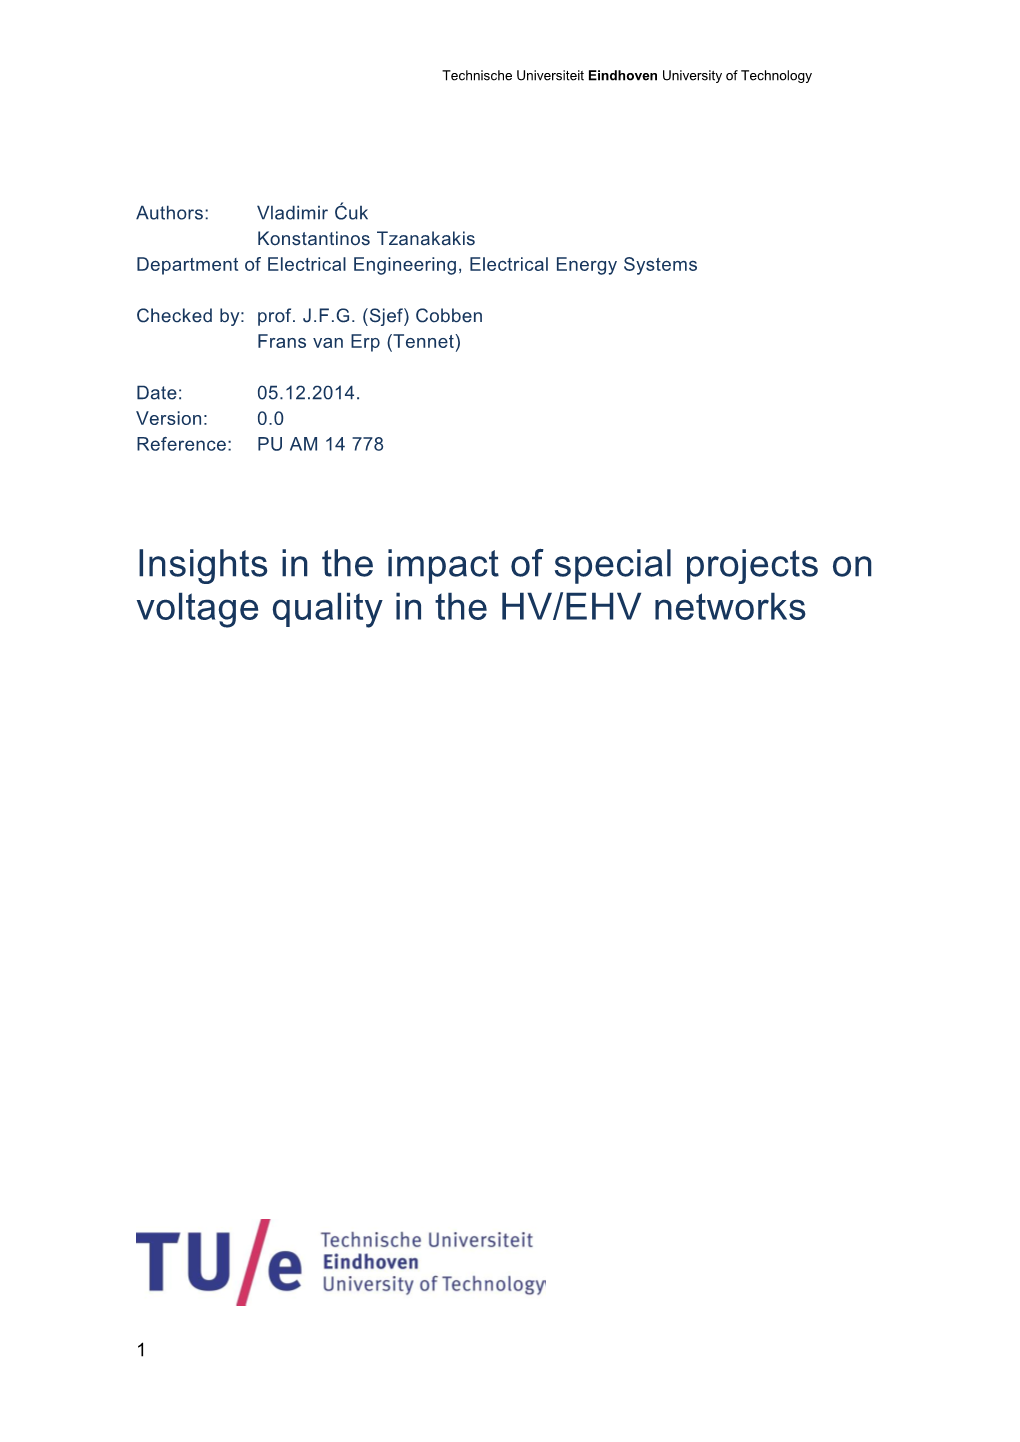 Insights in the Impact of Special Projects on Voltage Quality in the HV/EHV Networks